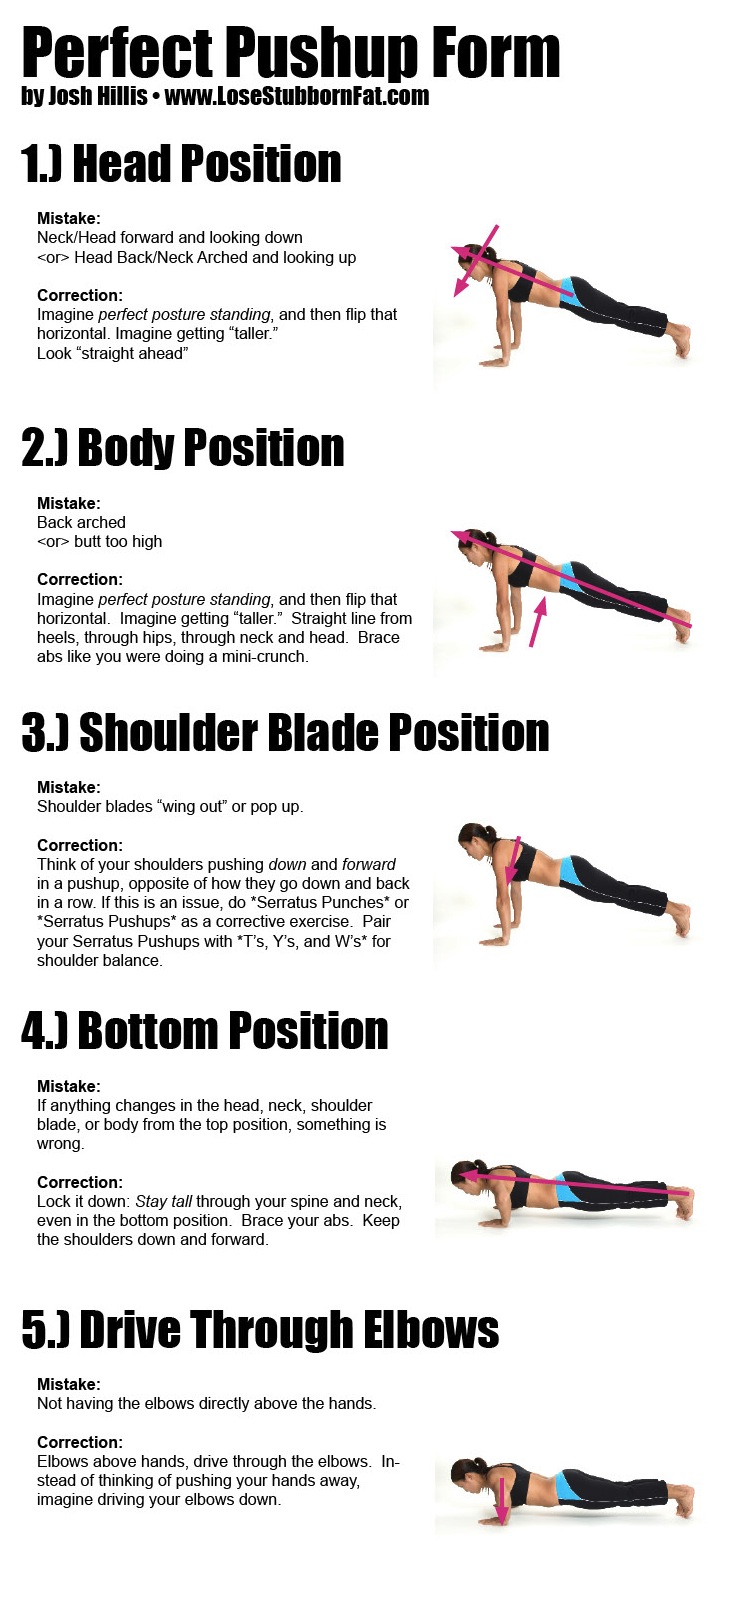 How to Do a Perfect Push Up